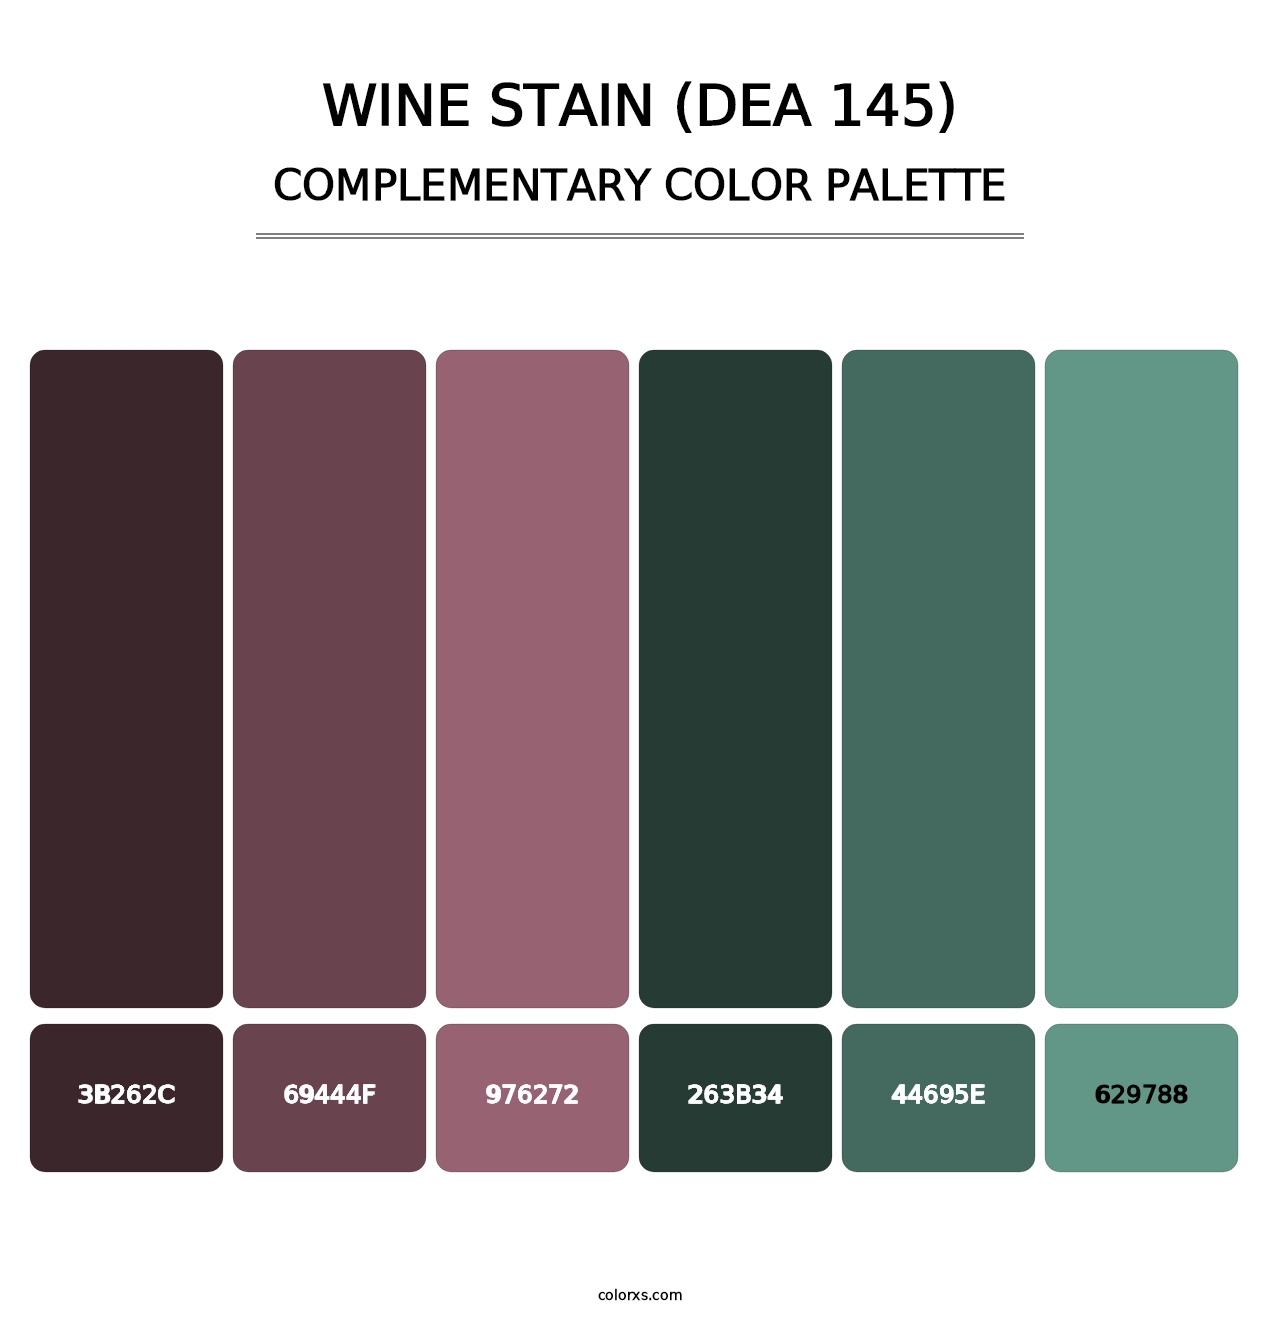 Wine Stain (DEA 145) - Complementary Color Palette